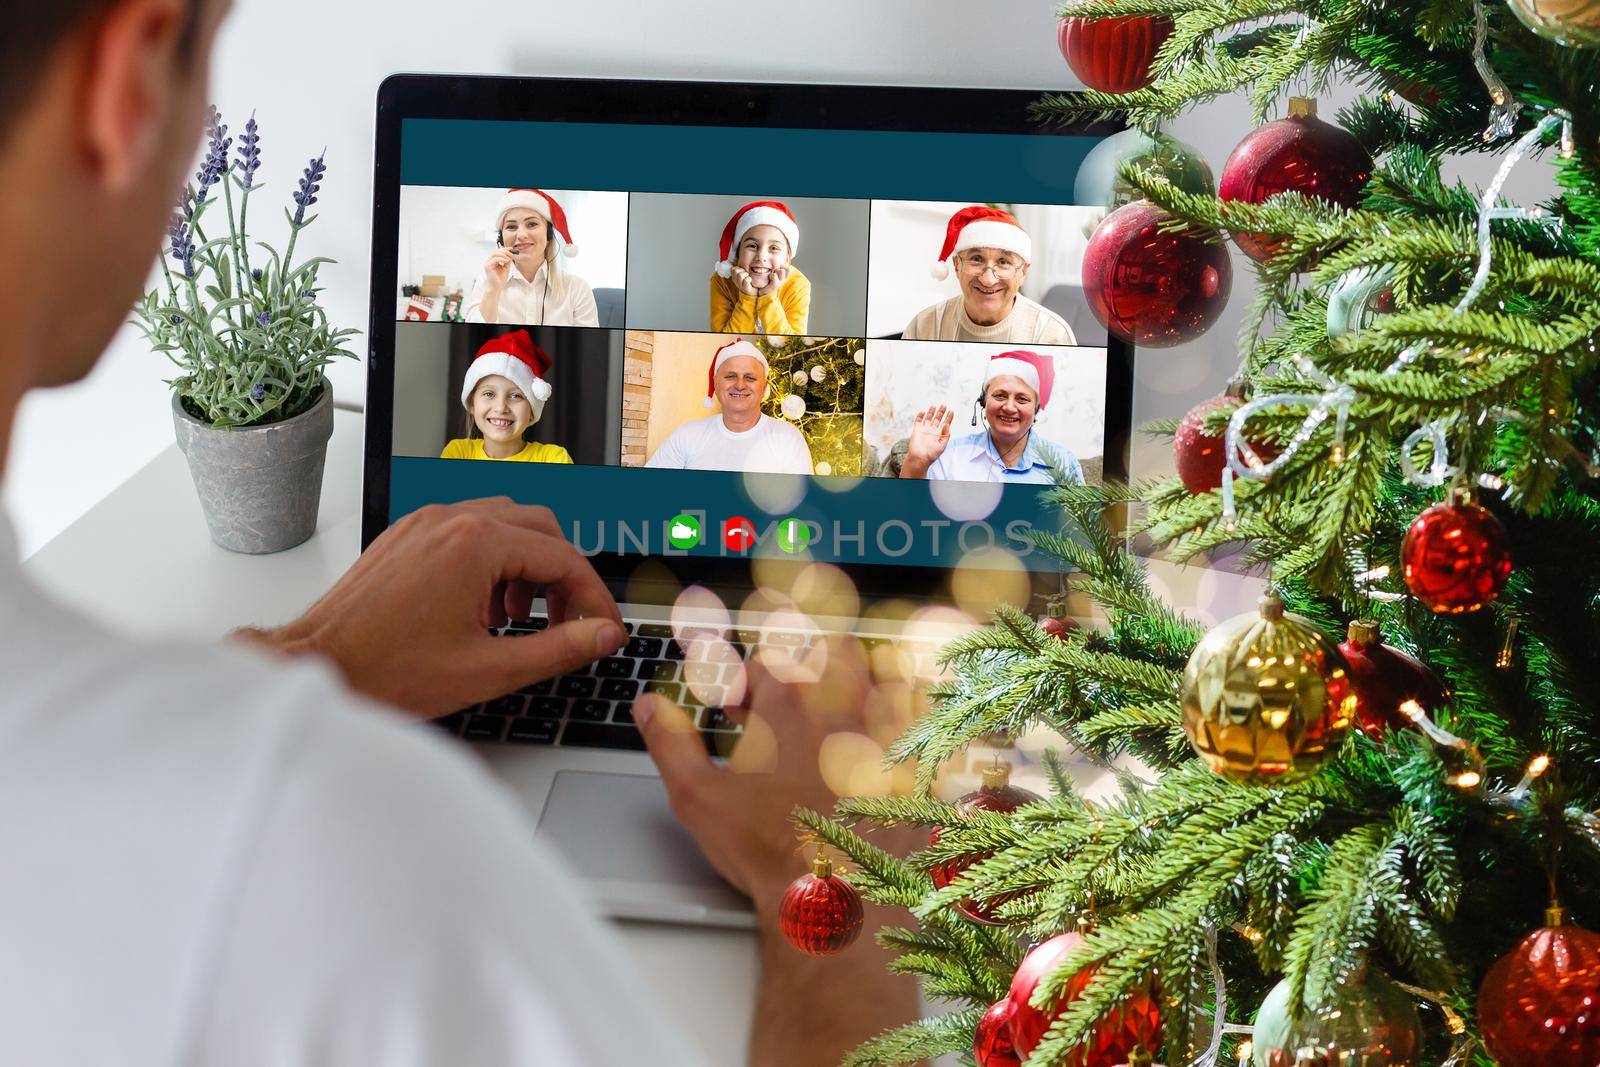 Virtual Christmas meeting team teleworking. Family video call remote conference Computer webcam screen view. Diverse portrait headshots meet working from their home offices. Happy hour party online